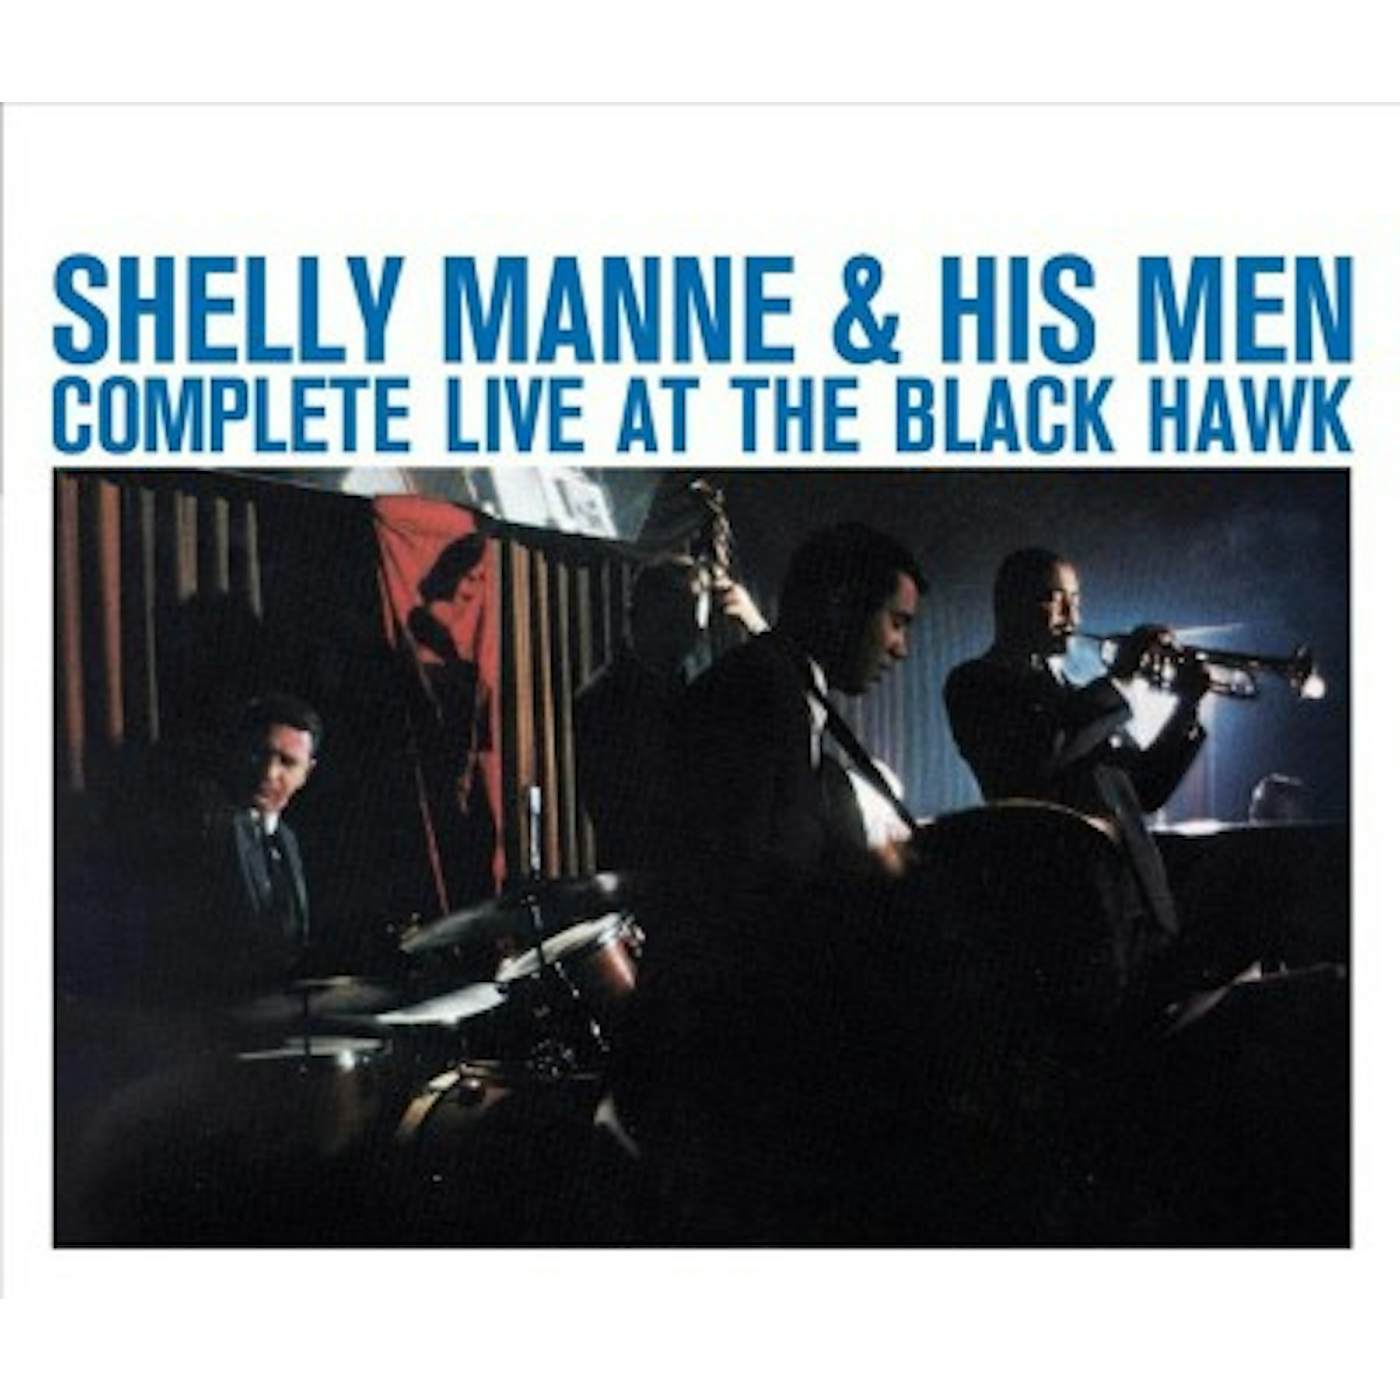 Shelly Manne & His Men Complete Live At the Black Hawk CD